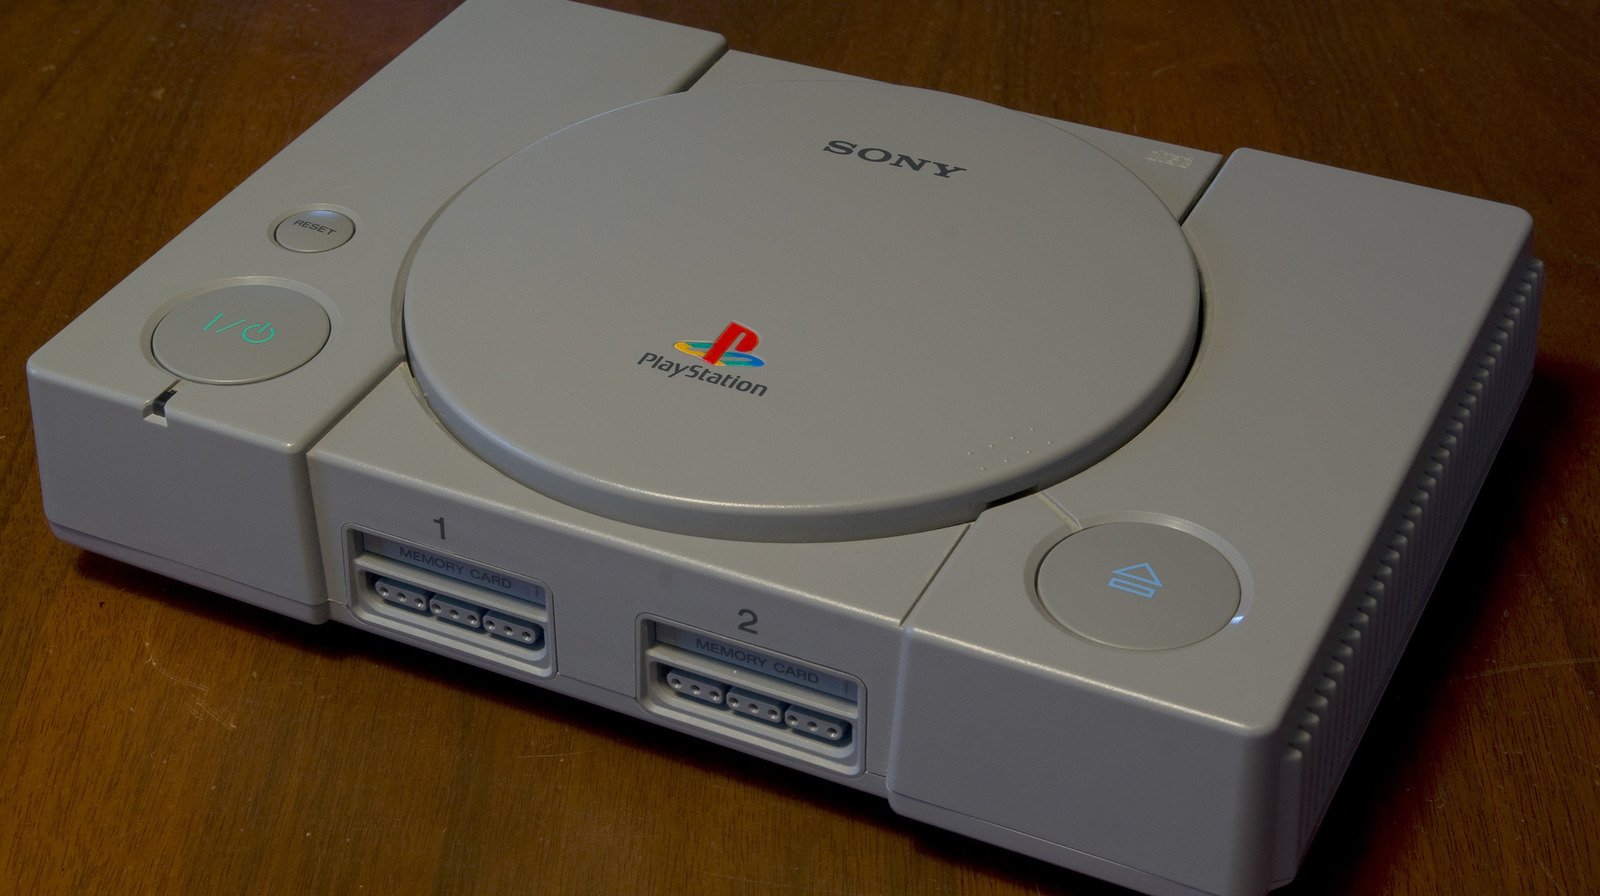 This PS1 Trick Resurfaces After Years Of Being Forgotten - SVG